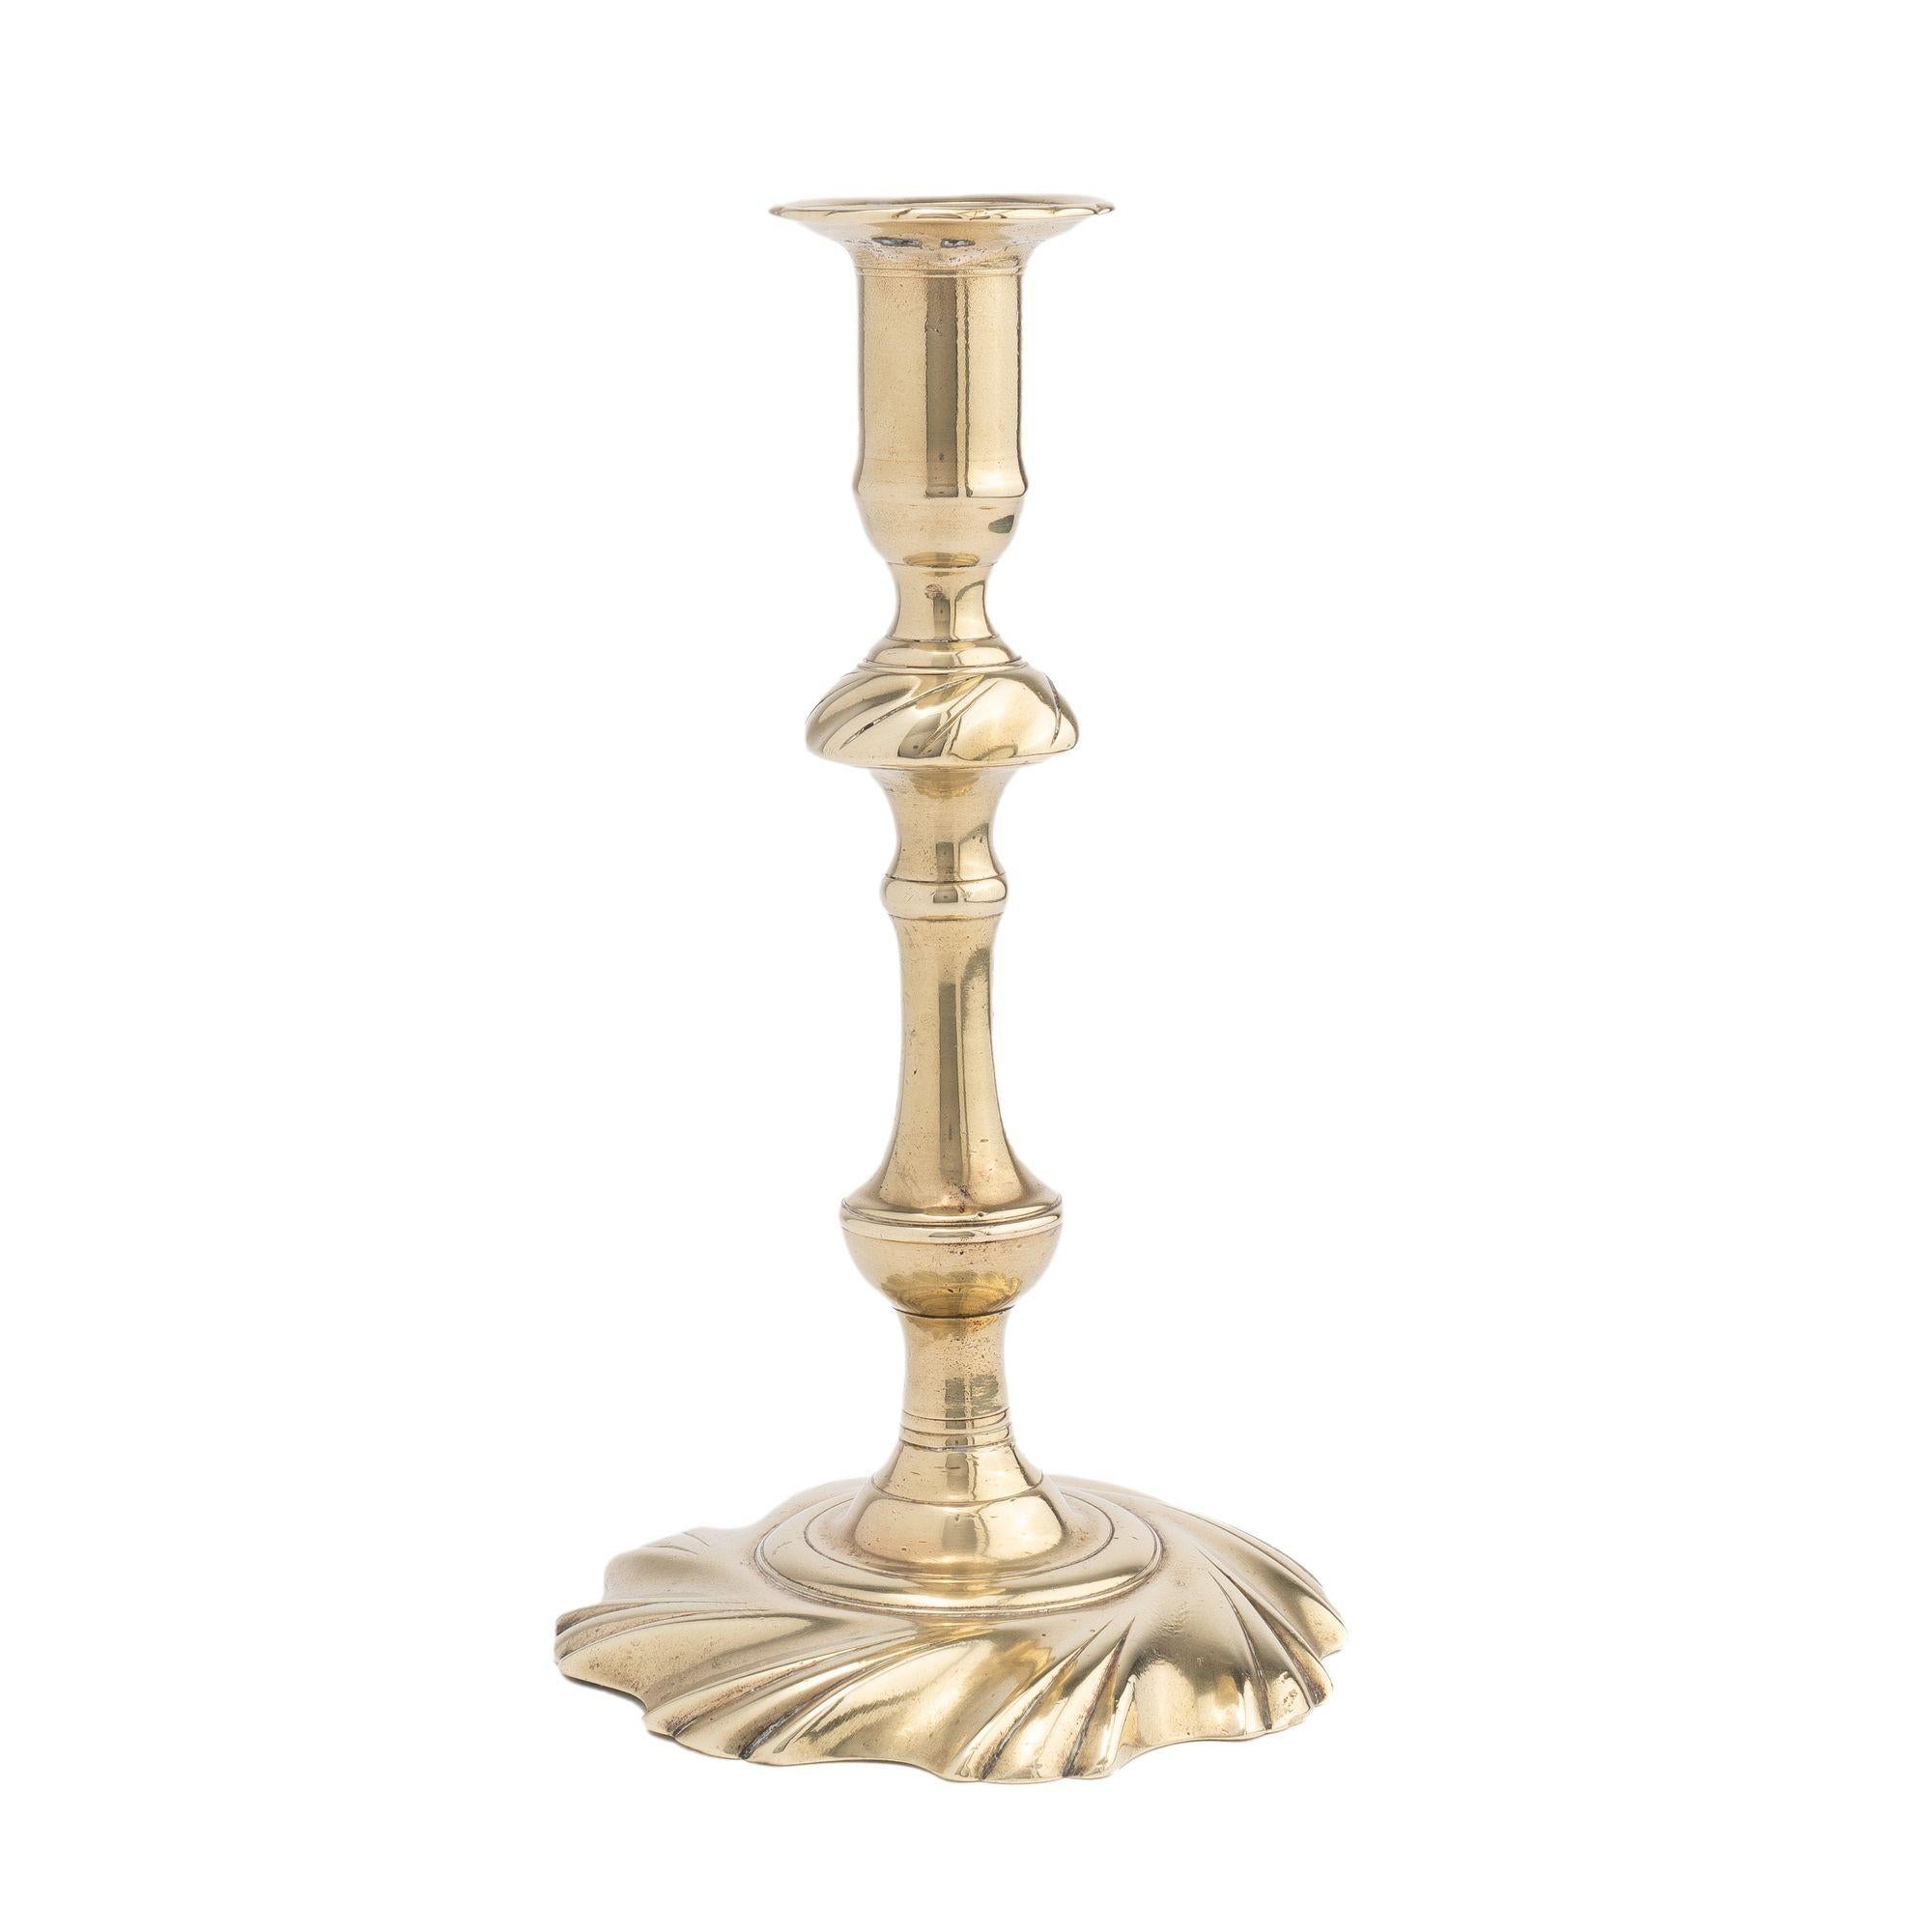 Seam cast brass baluster candlestick which incorporates a swirl cast knob on the candle shaft, and swirl edge on the rim of the bobeshe which is peened to an eight lobed swirl base.

Birmingham, England, circa 1750.